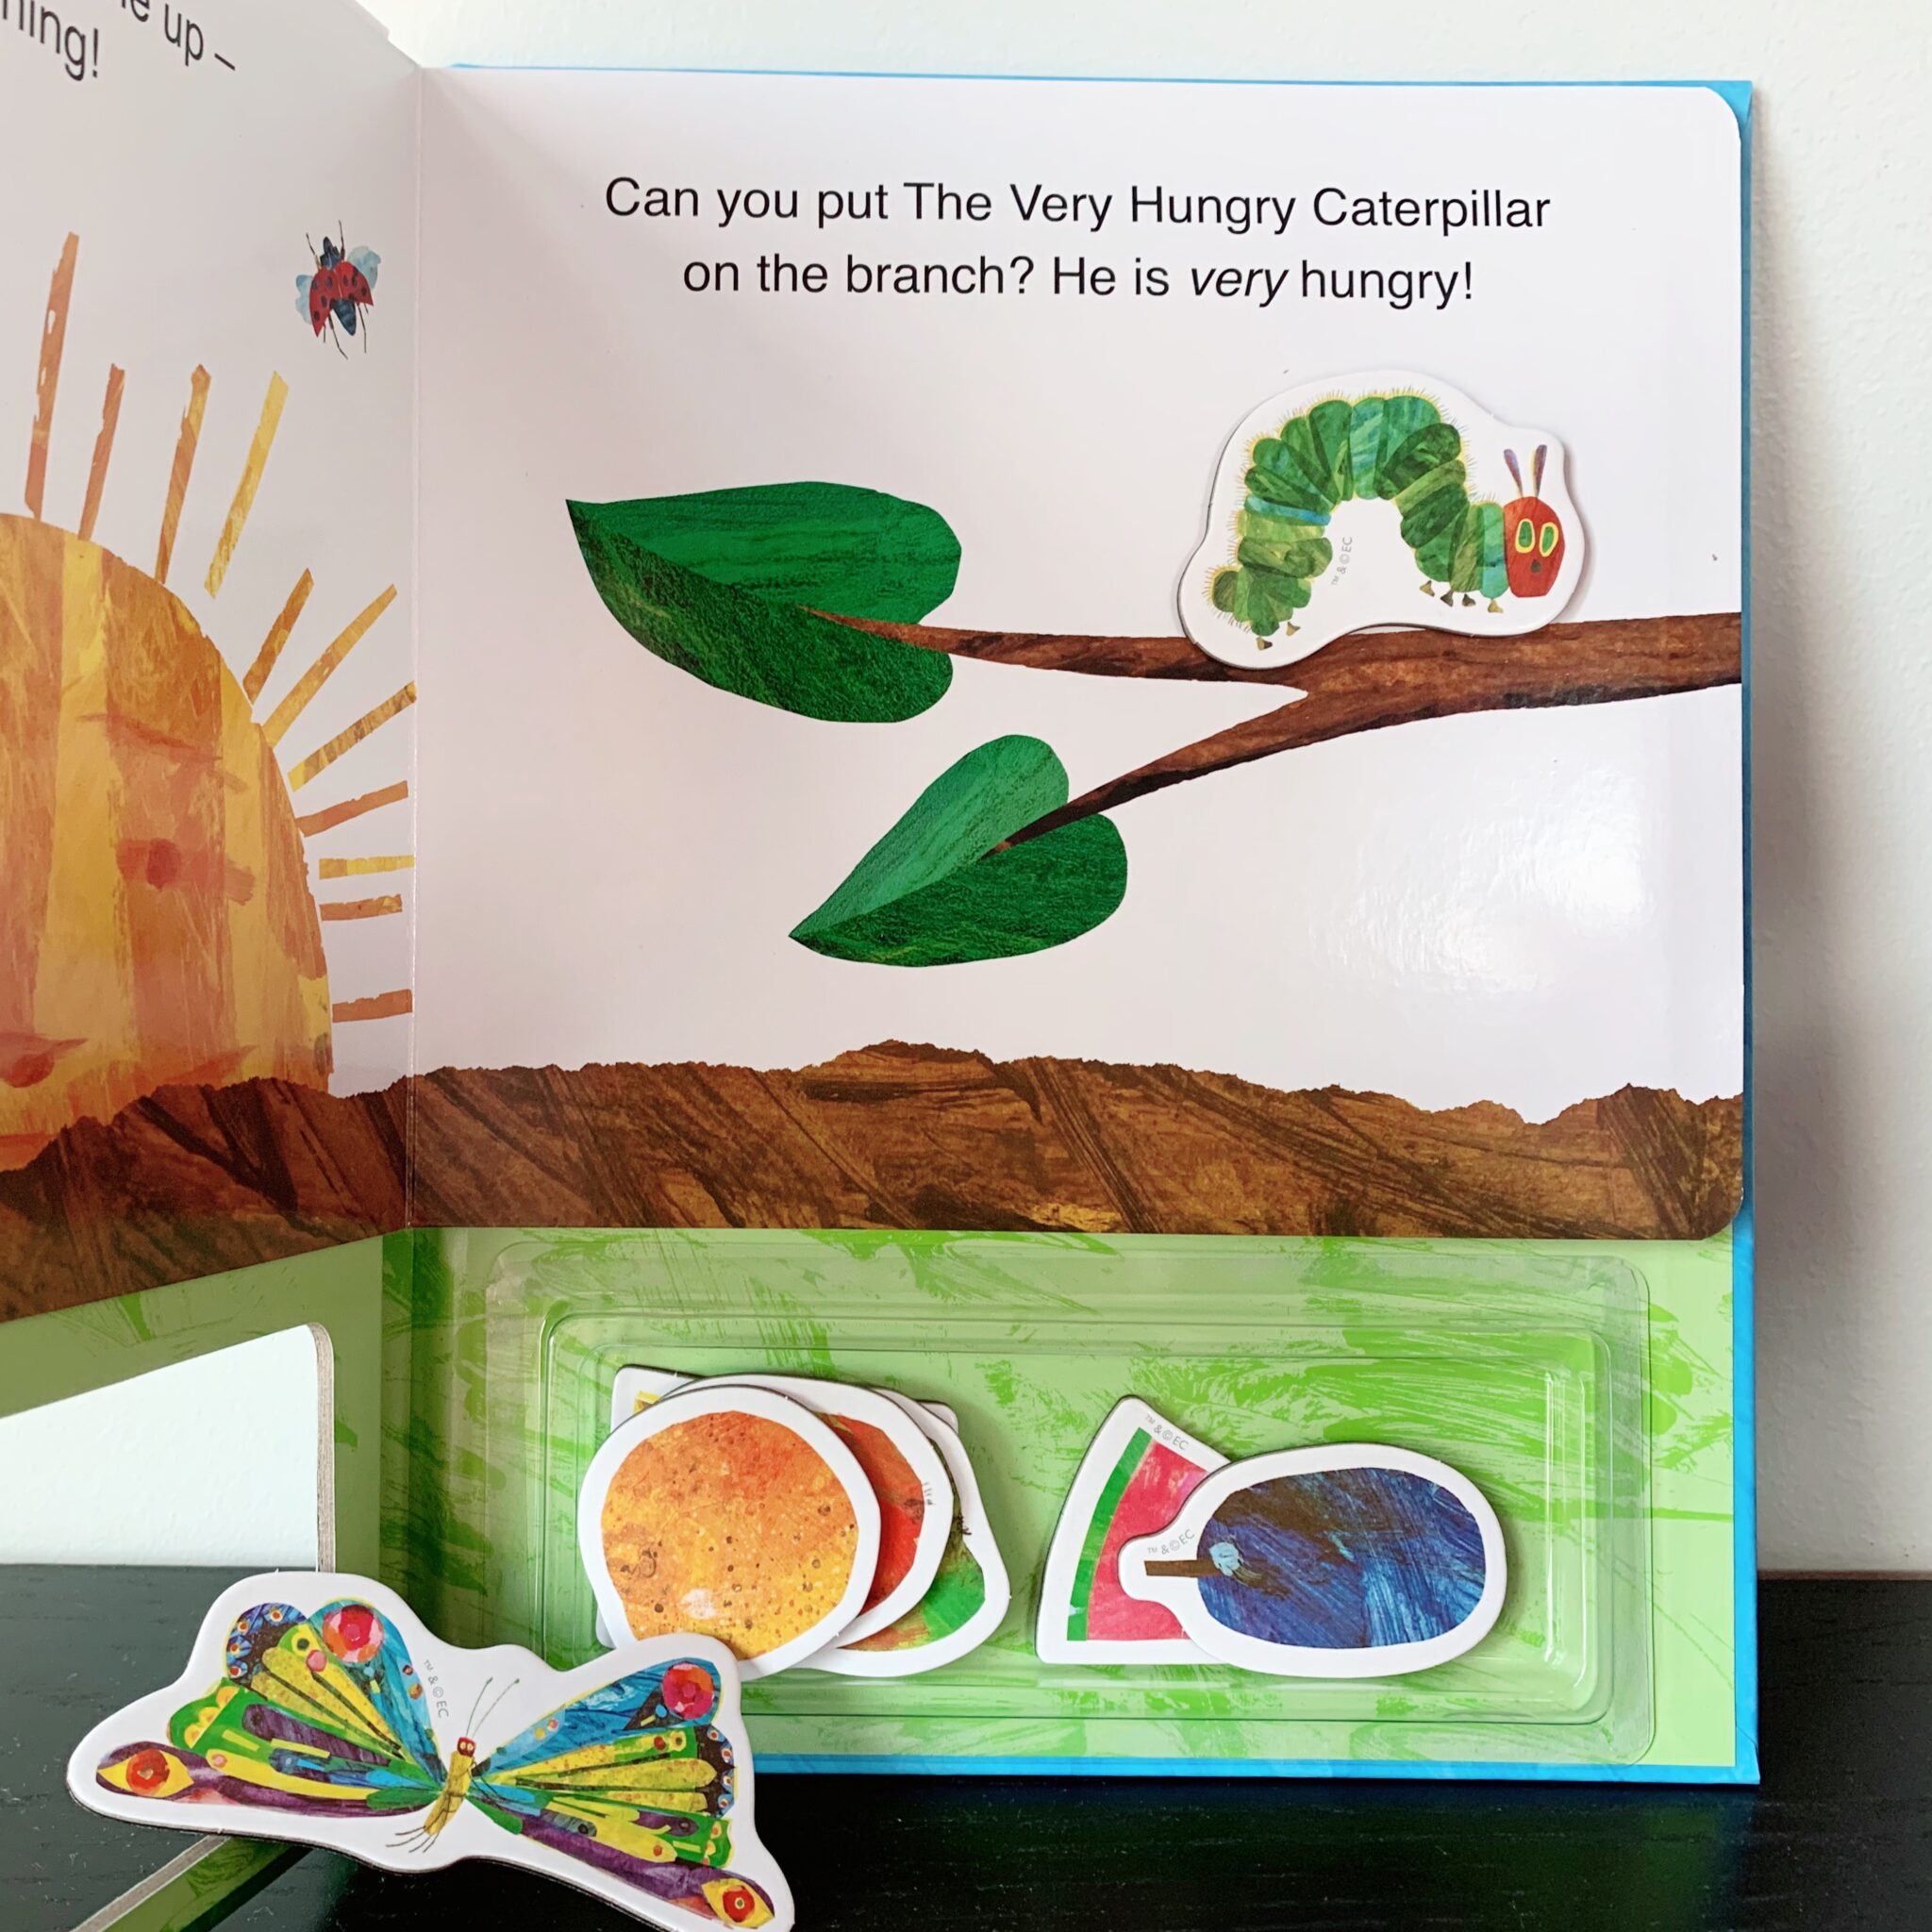 The Very Hungry Caterpillar Book By Eric Carle Three Little Cubs